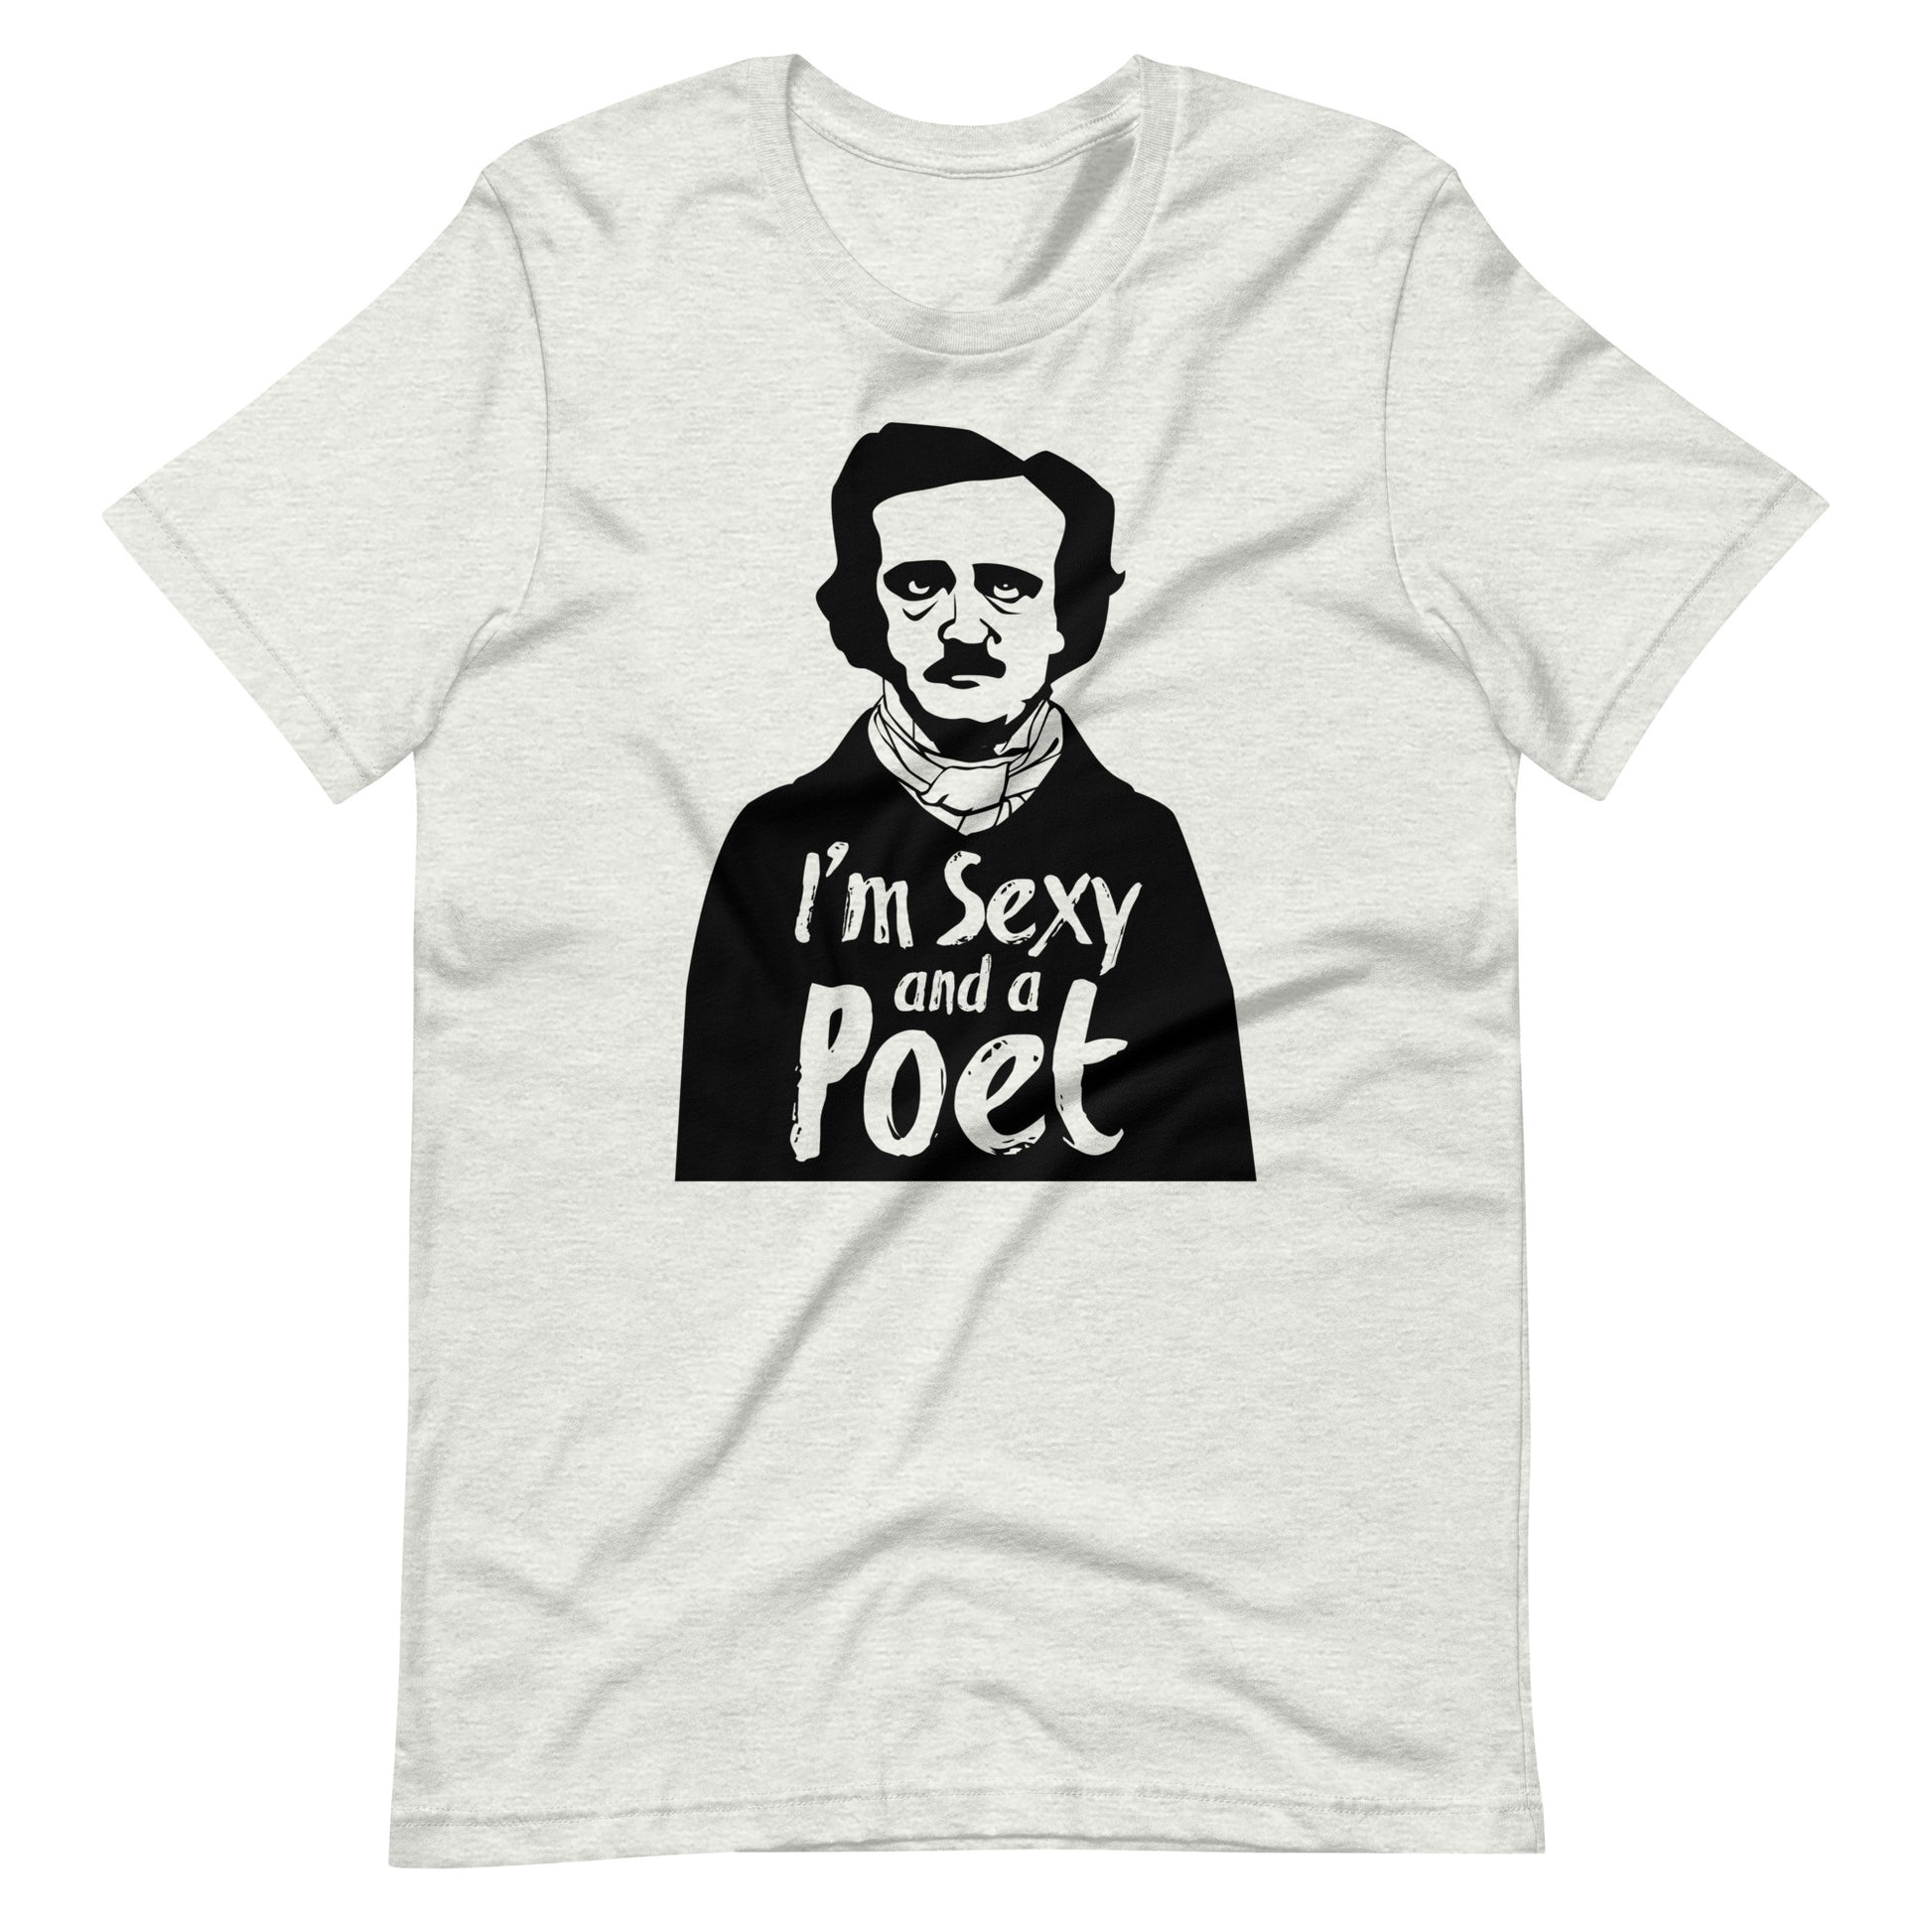 Women's Edgar Allan Poe "I'm Sexy and a Poet" t-shirt - Ash Front